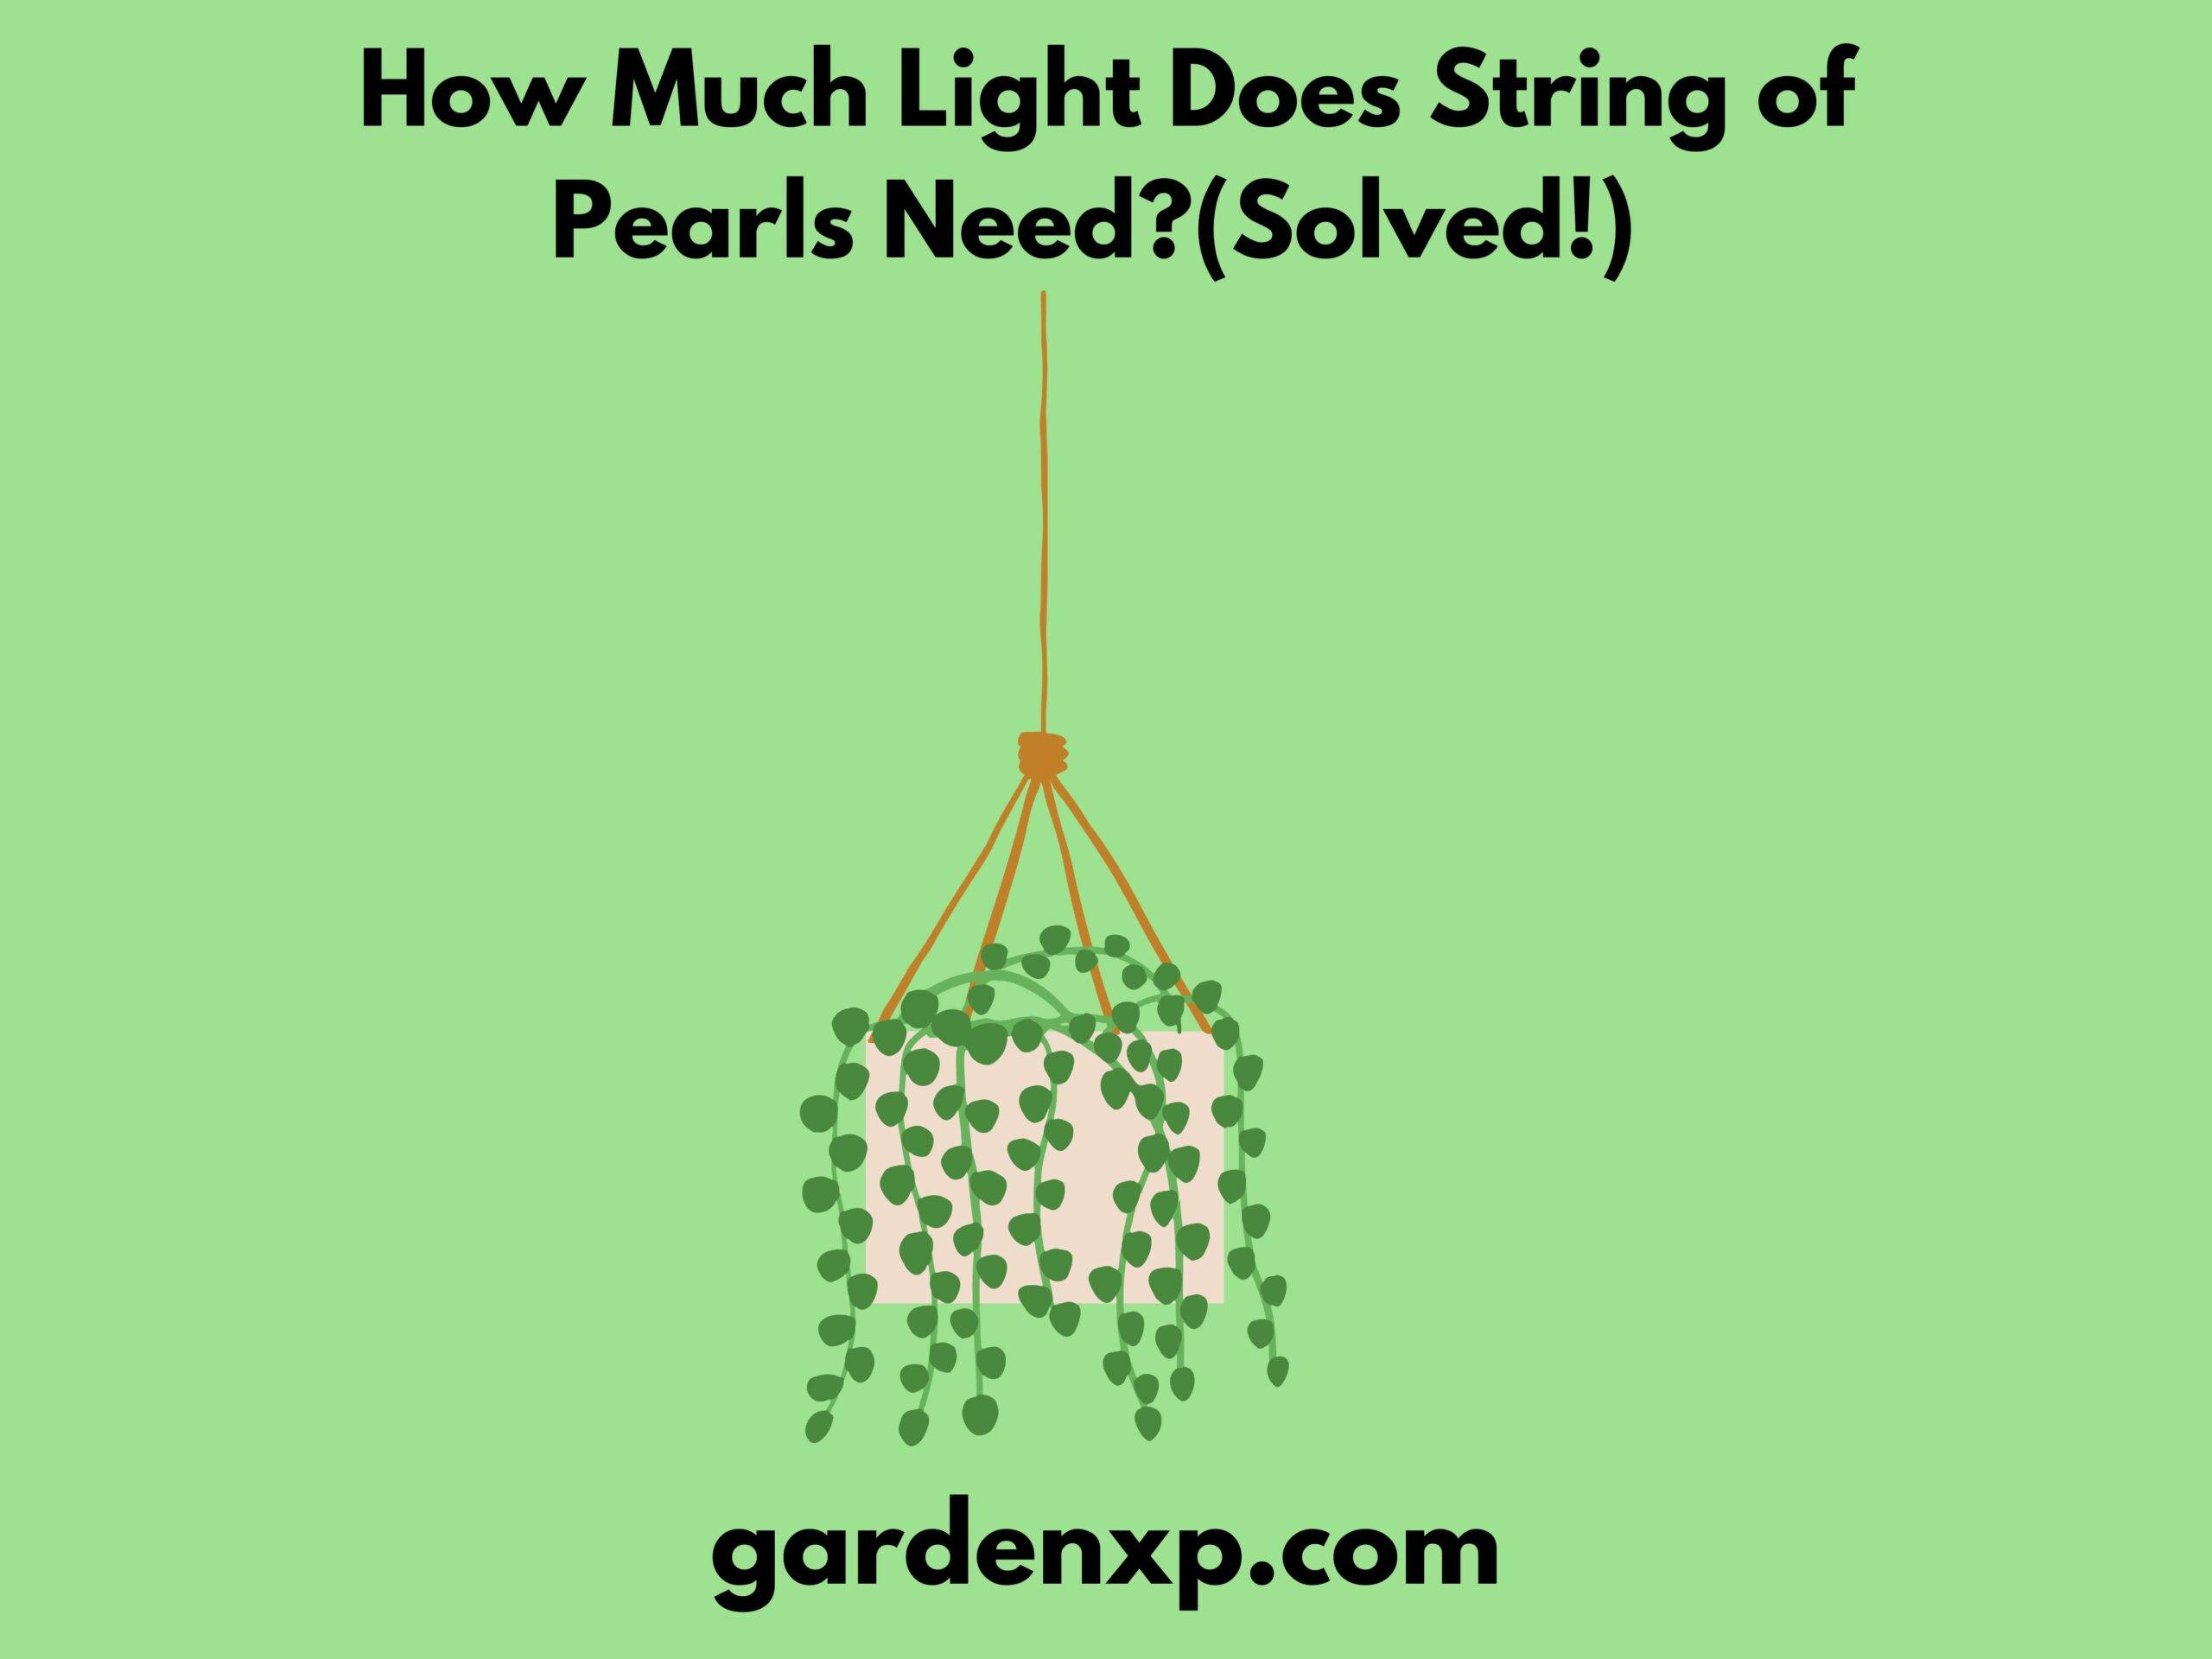 How Much Light Does String of Pearls Need? (Solved!)